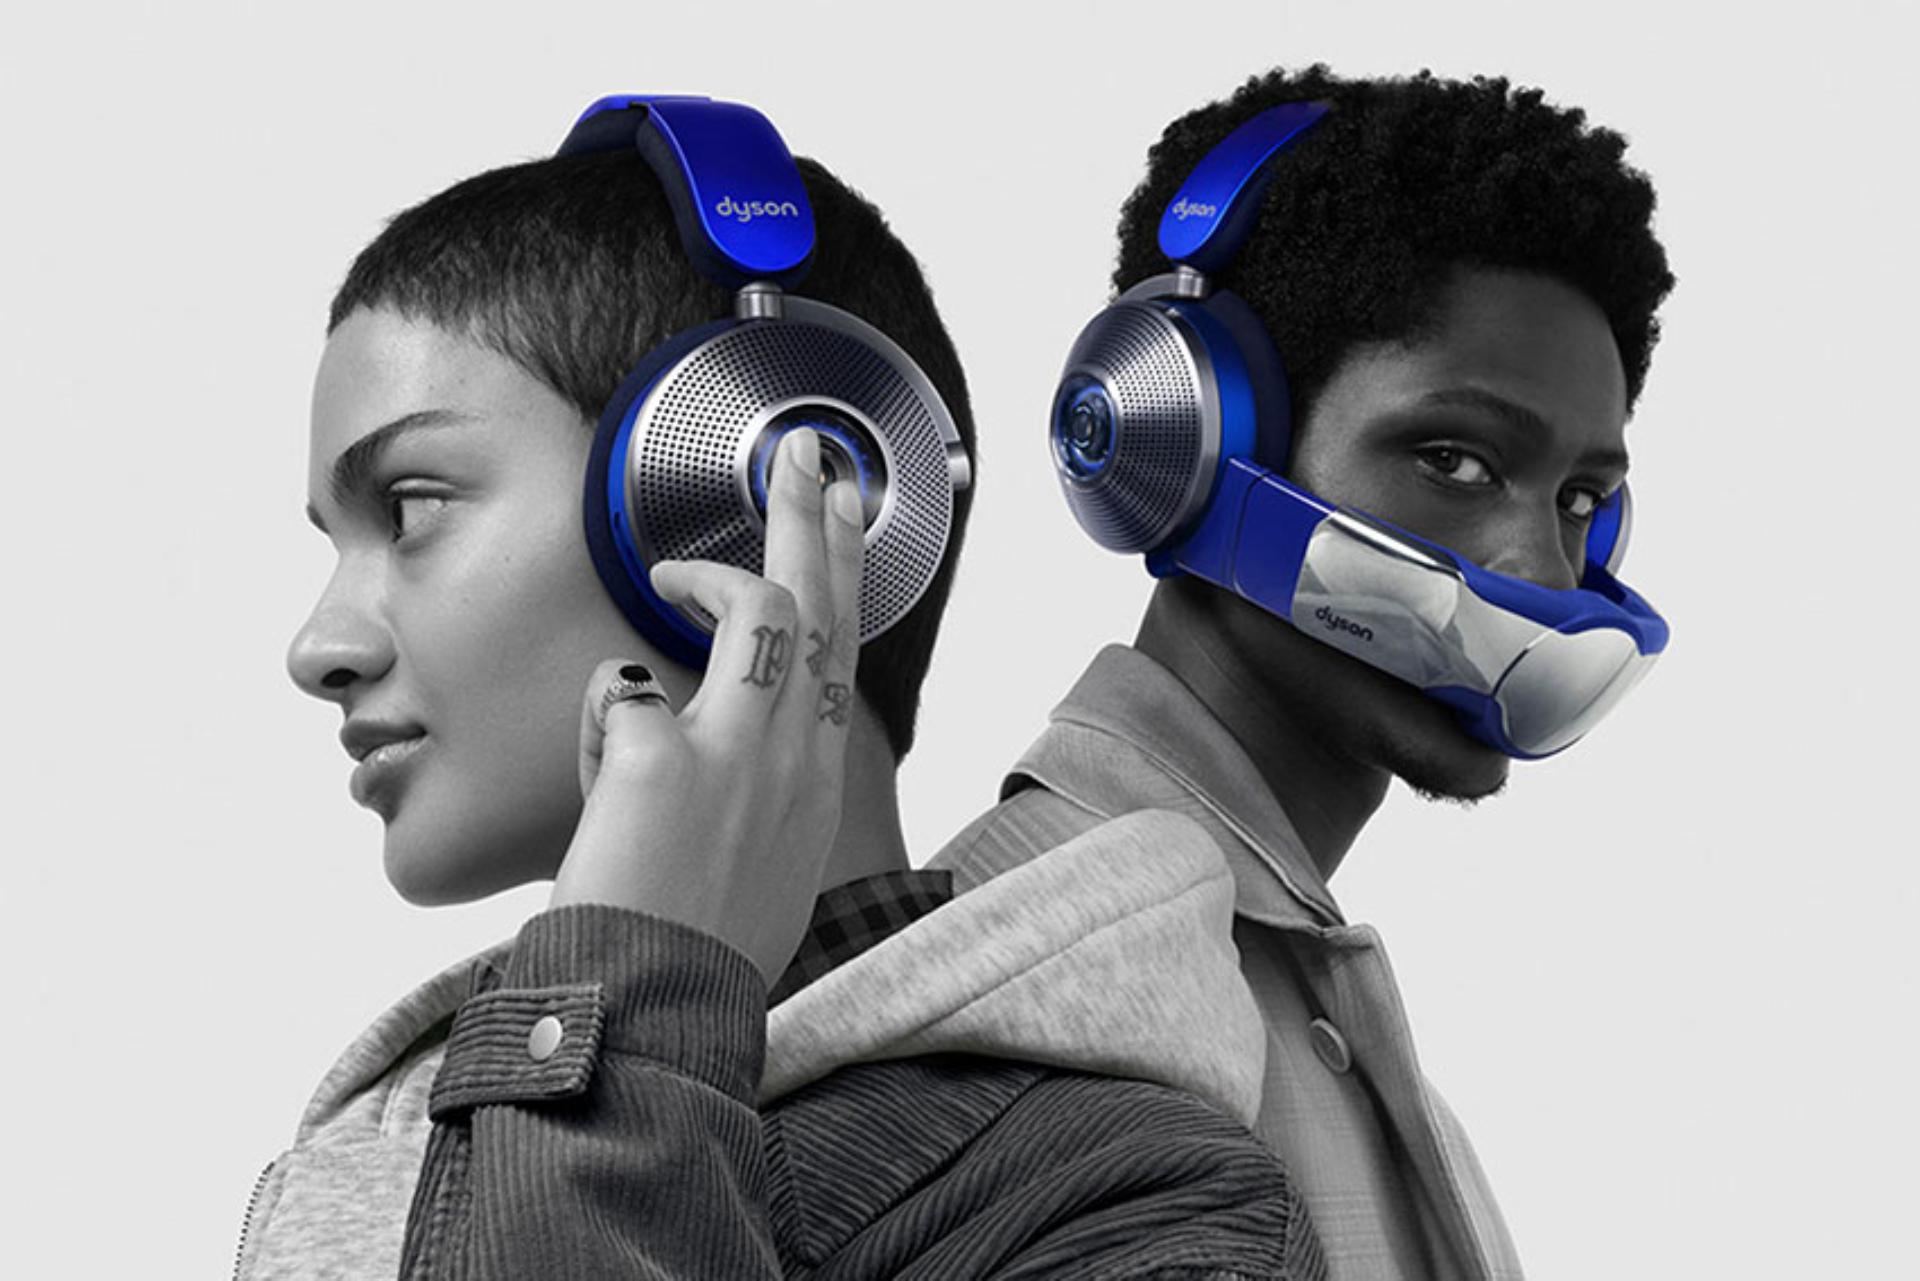 Man using the Dyson Zone noise cancelling headphones